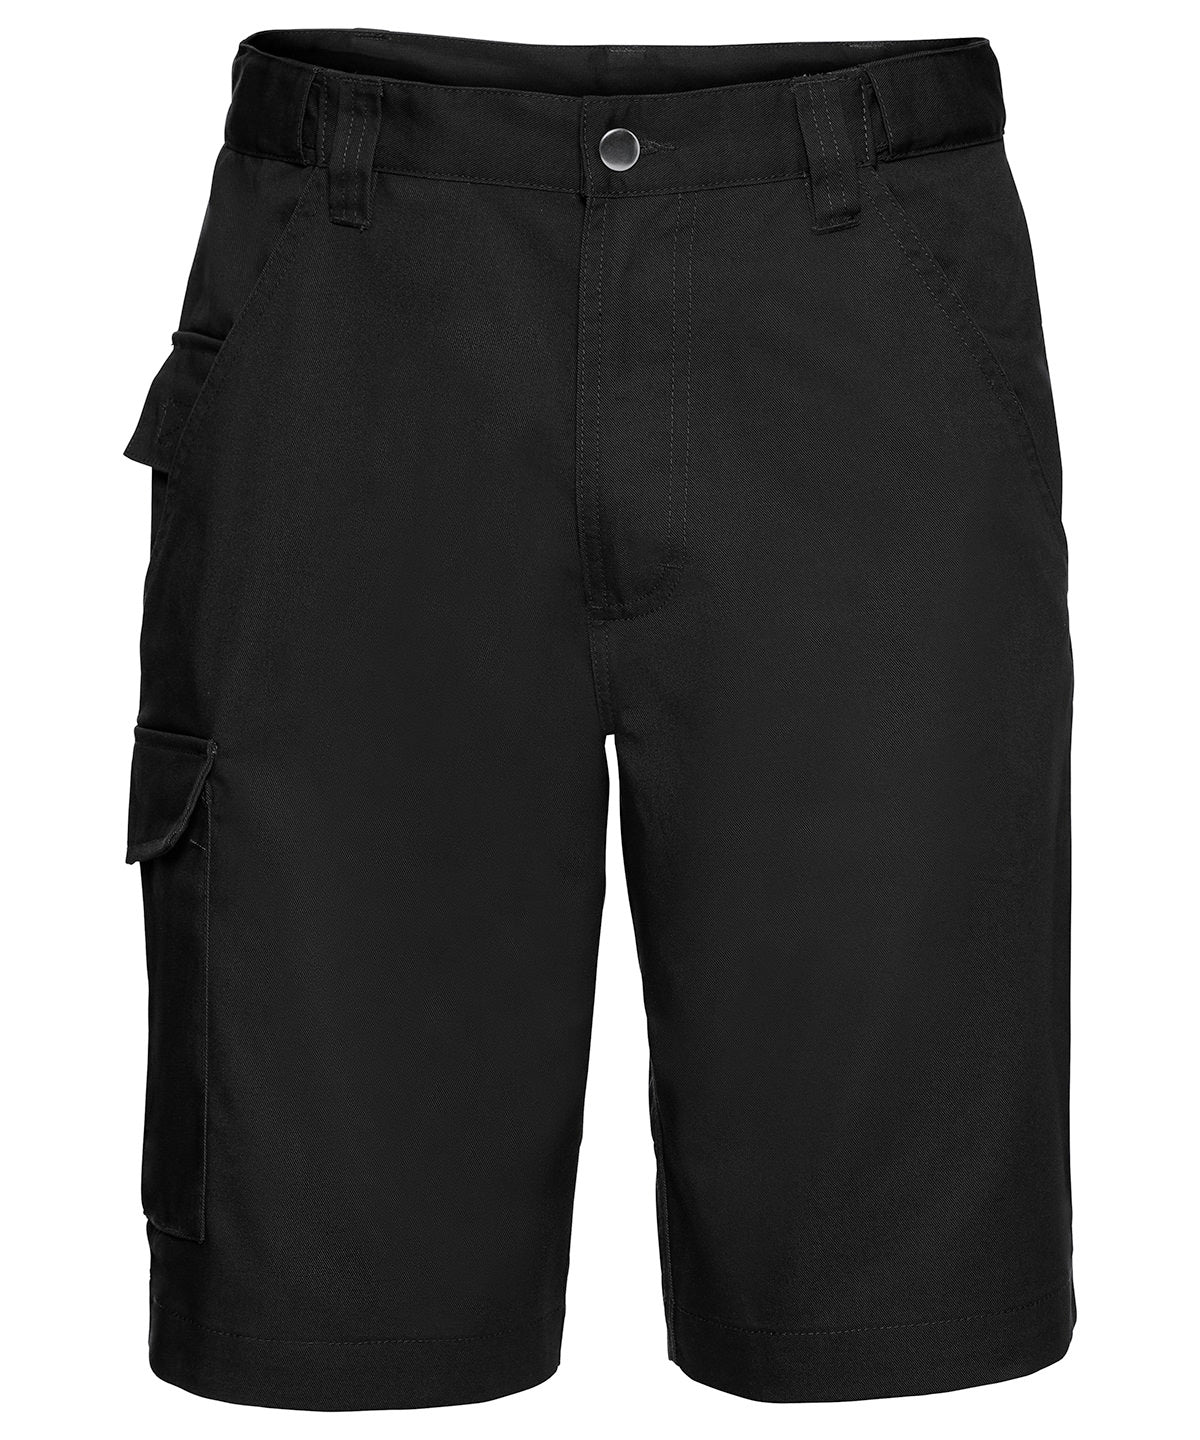 Personalised Shorts - Black Russell Europe Polycotton twill workwear shorts